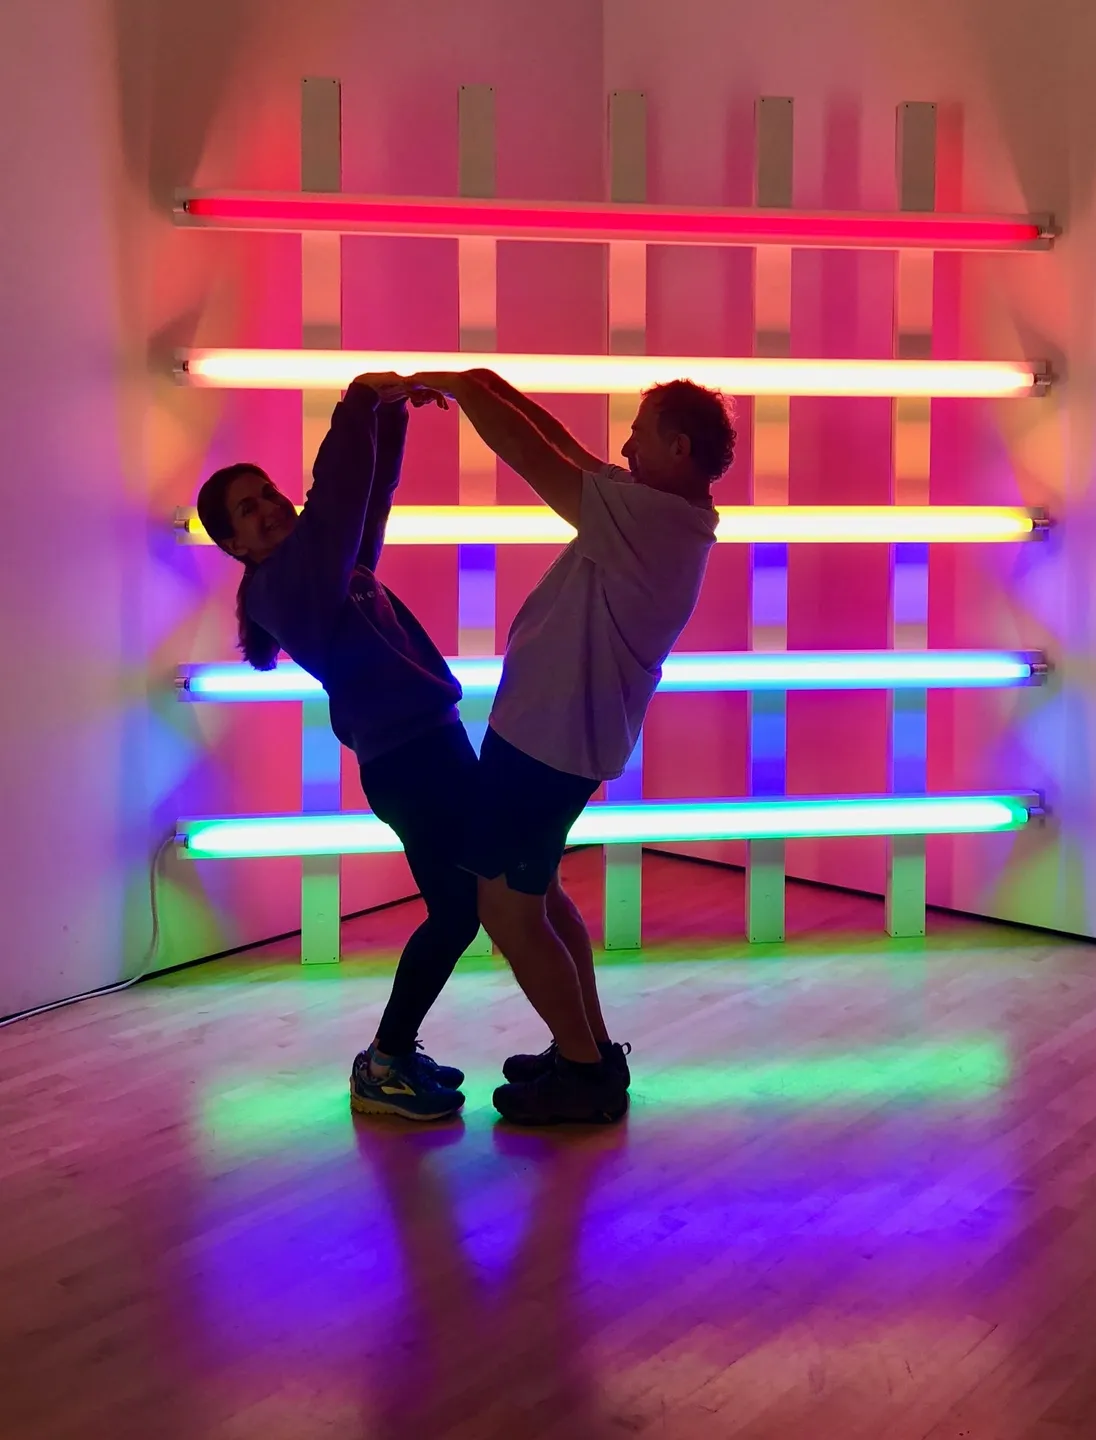 Two people are dancing in a room with neon lights.